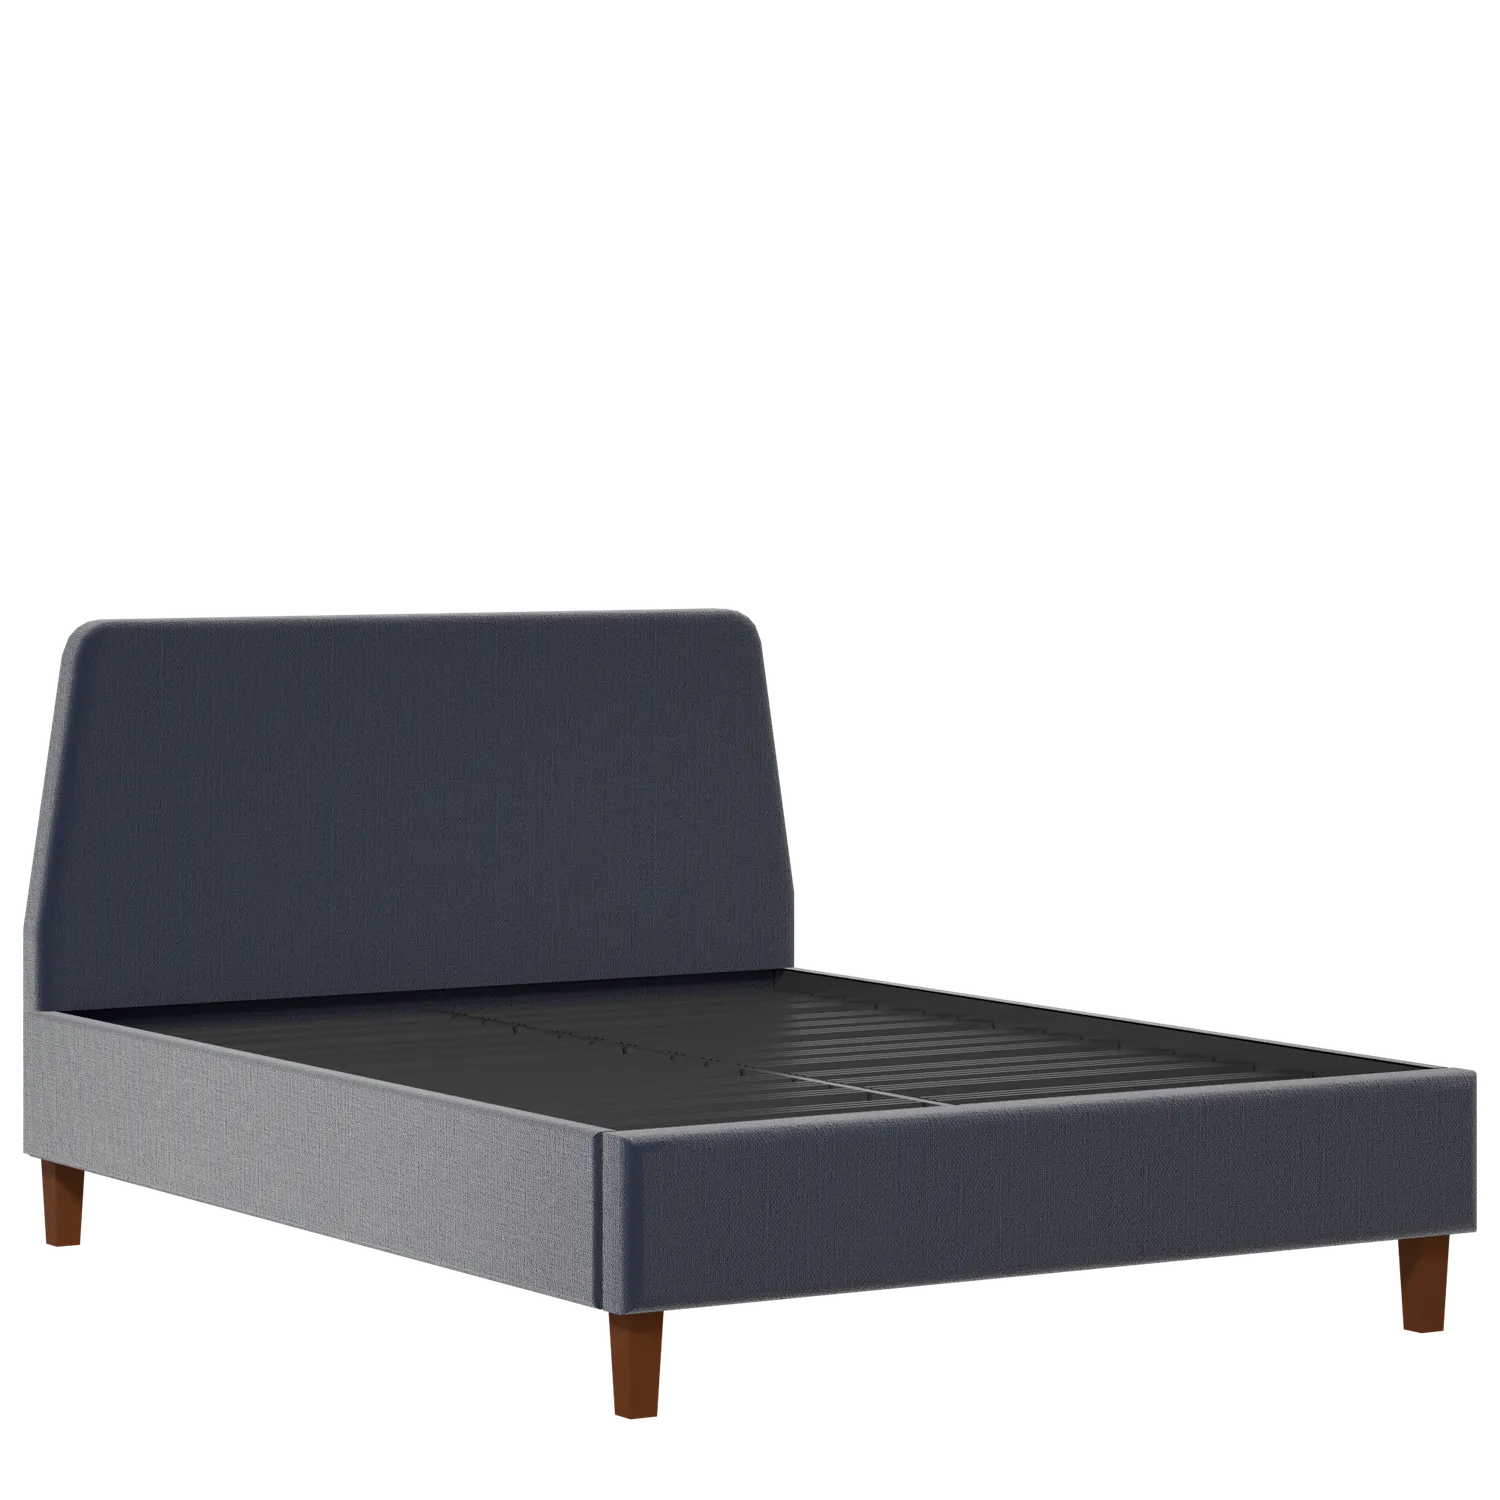 Hanwell Slim upholstered bed in oxford blue fabric